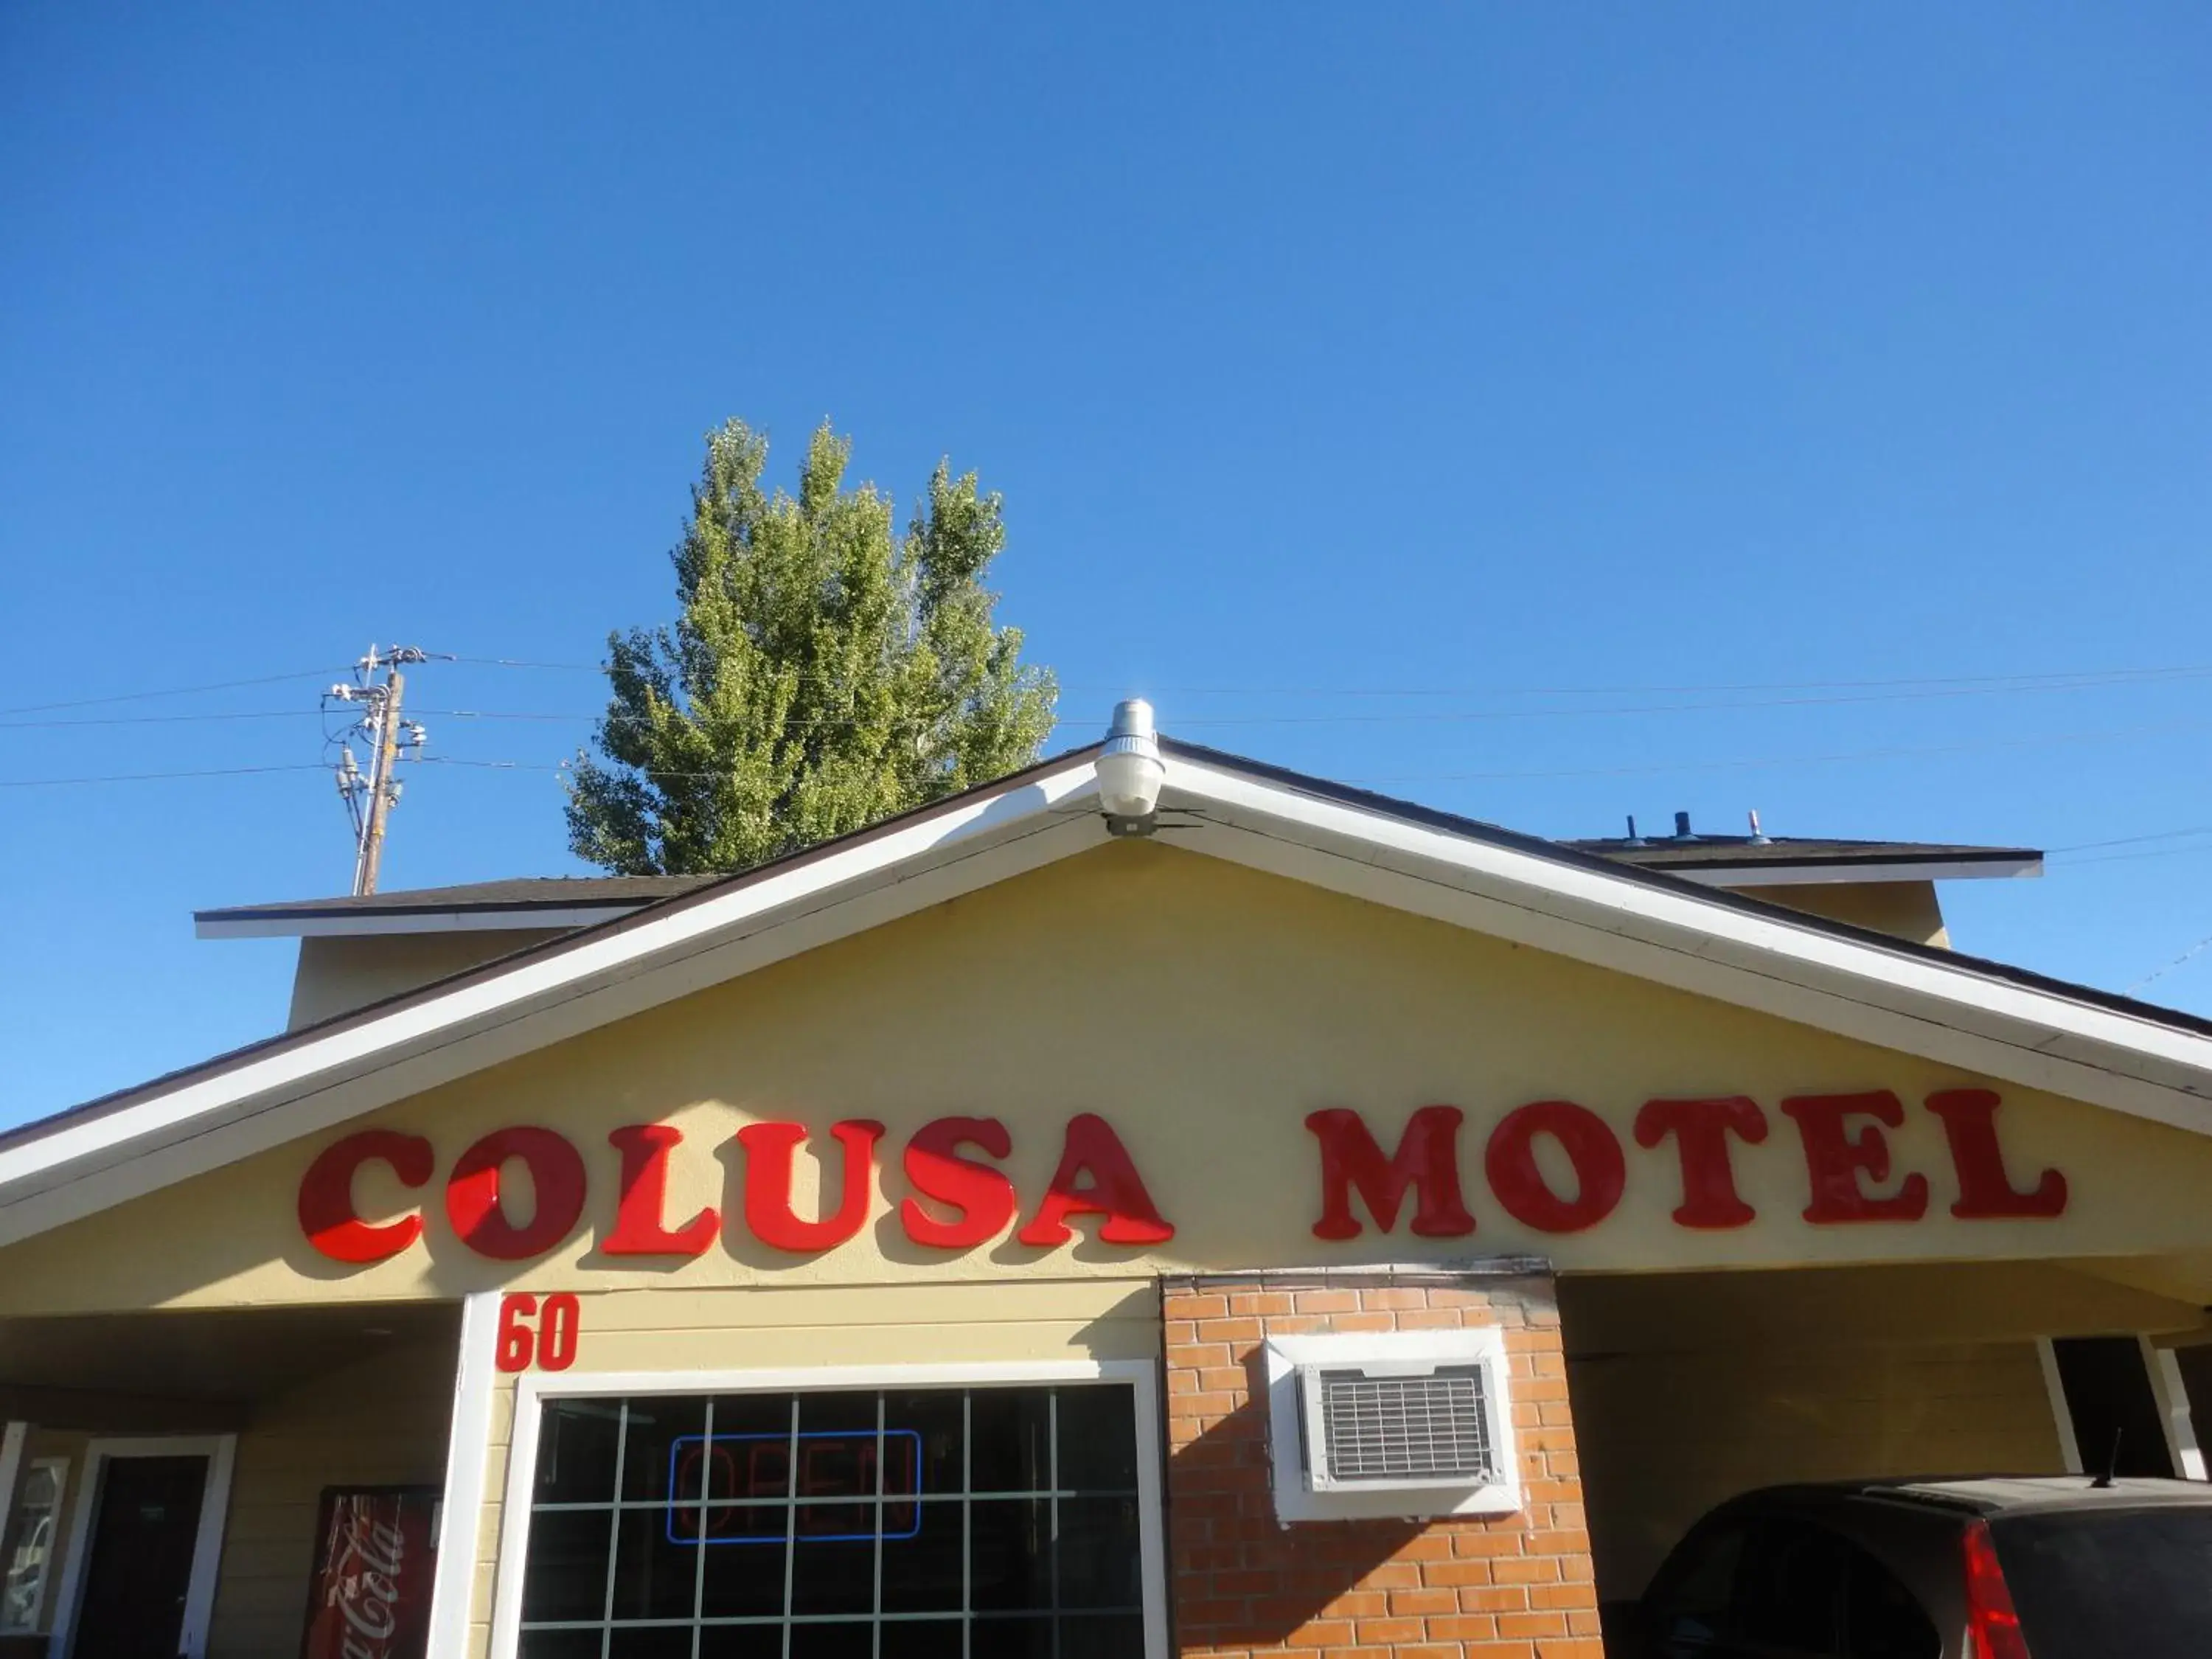 Property Building in Colusa Motel